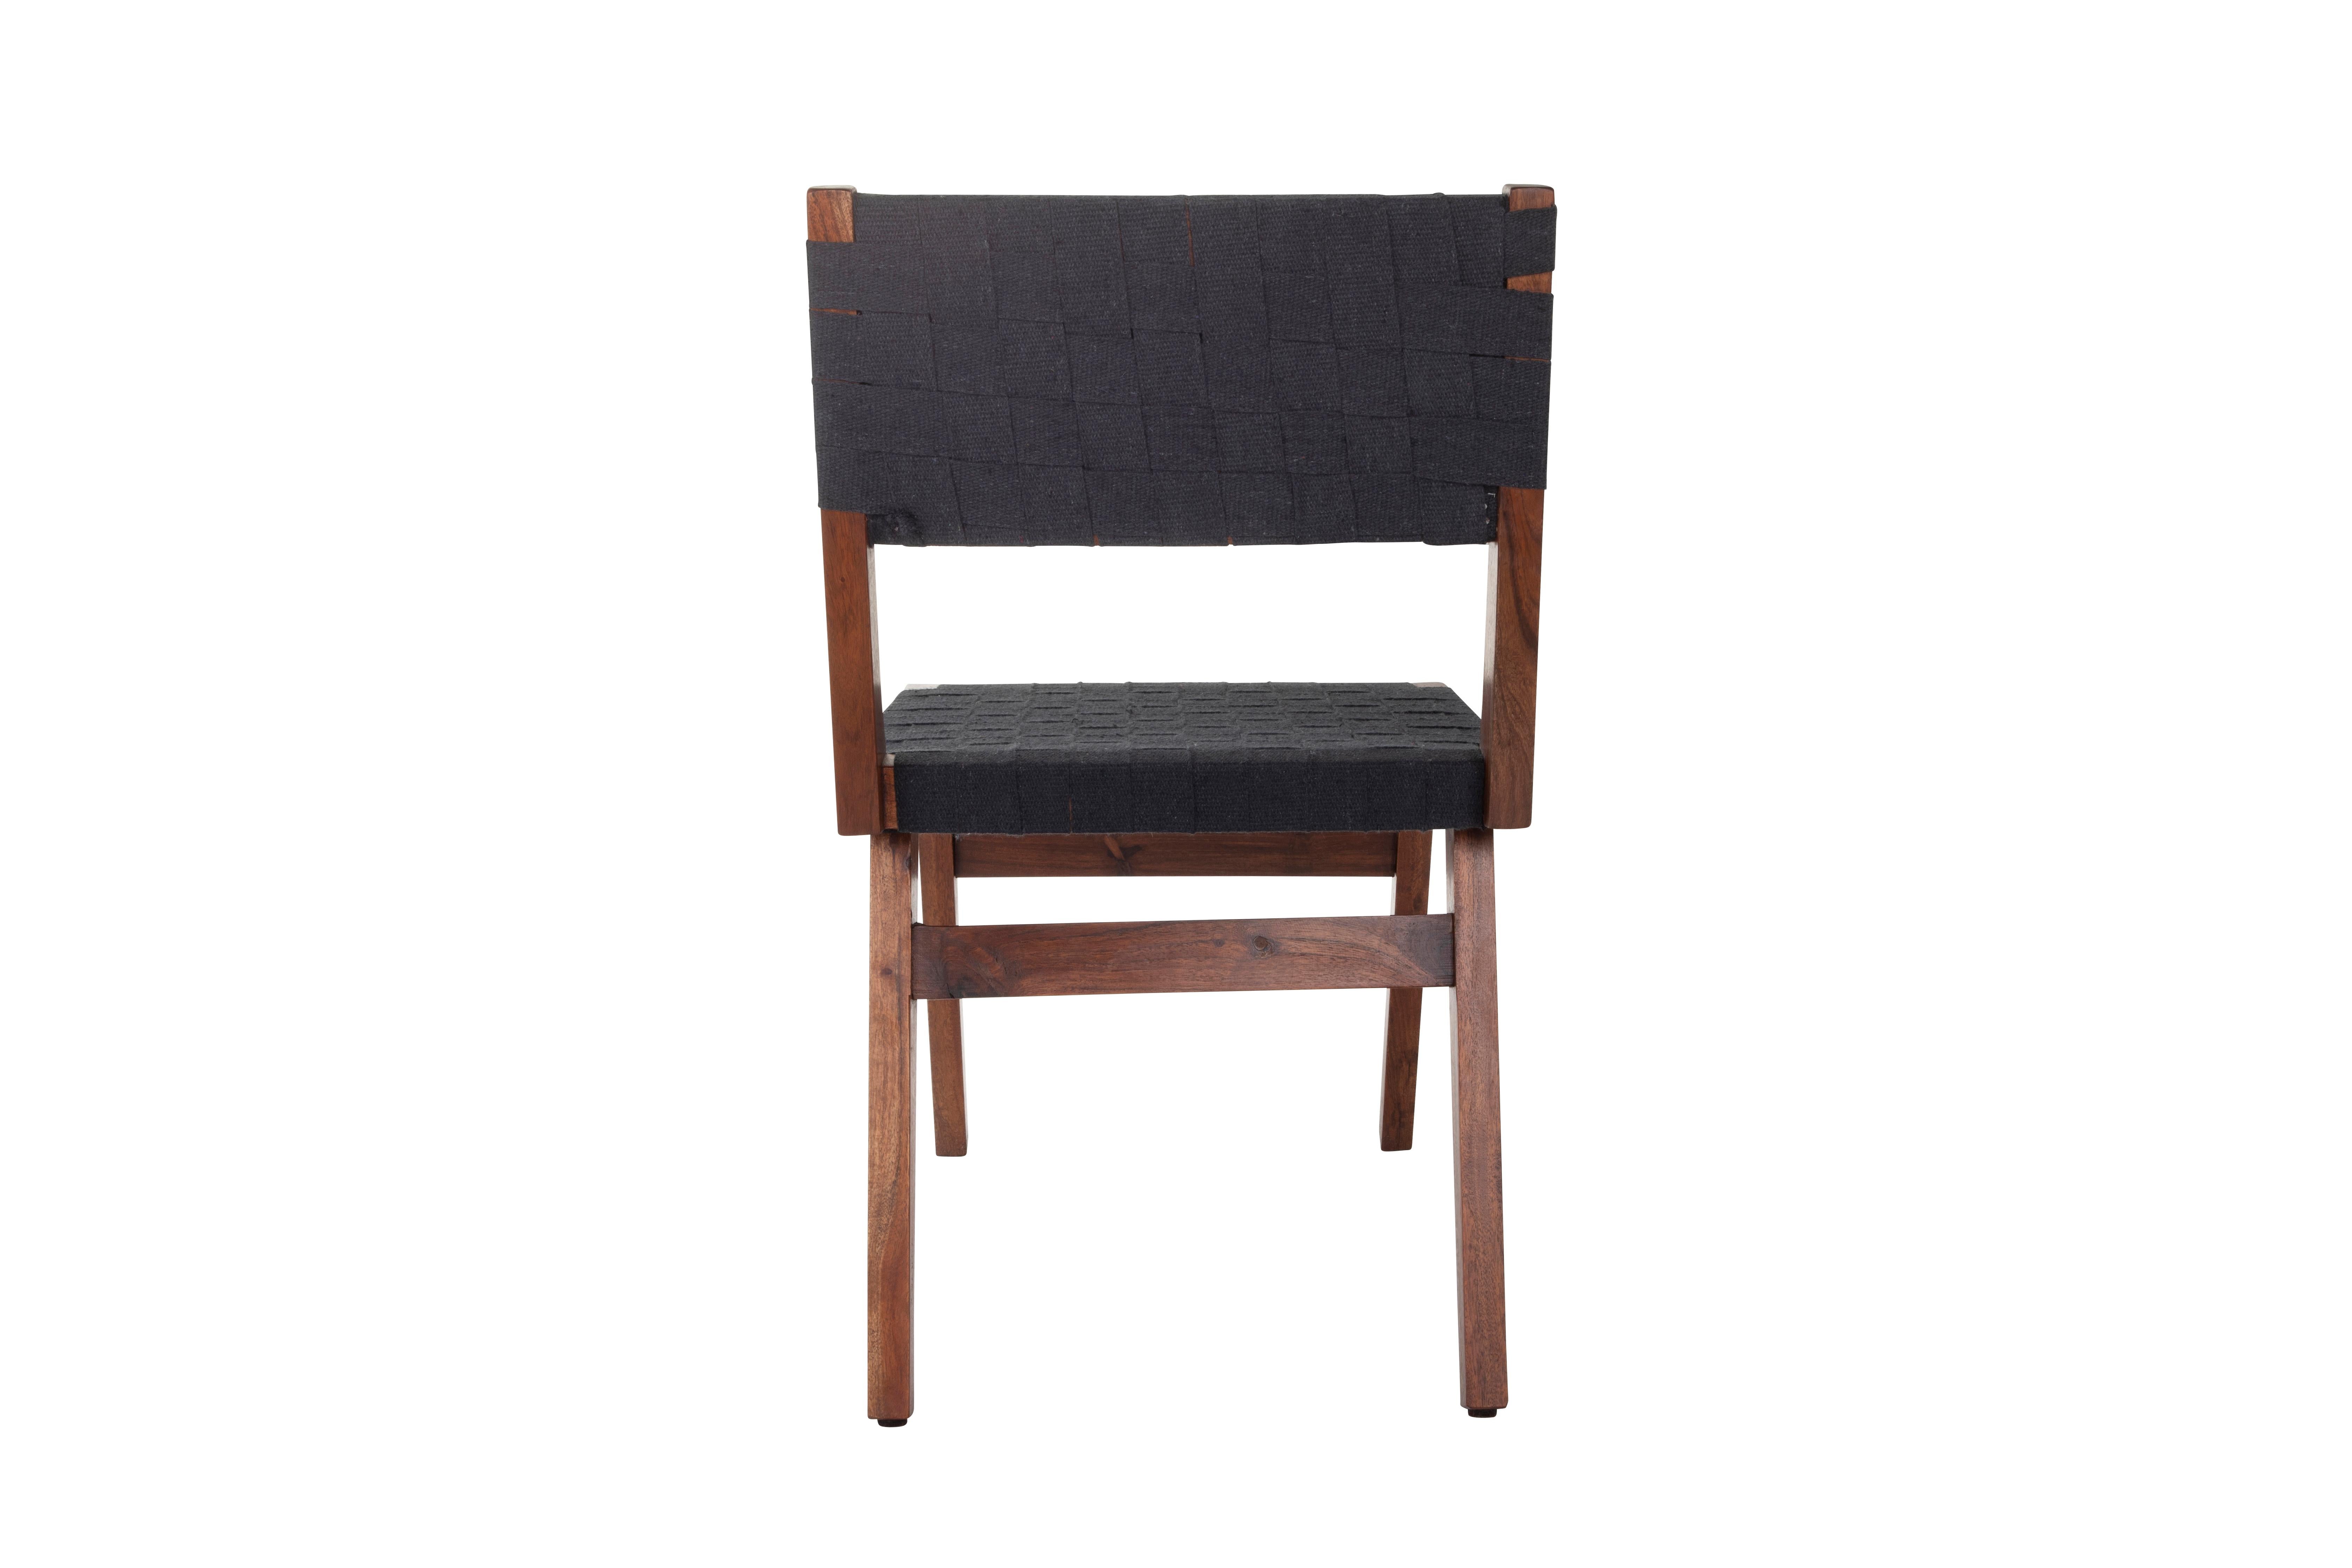 This mid-century modern style set of six dining chairs. Features hand-woven canvas straps and a wooden frame. Chairs are in very good condition with minor wear.

The piece is a part of our one-of-a-kind collection, Le Monde. Exclusive to us.